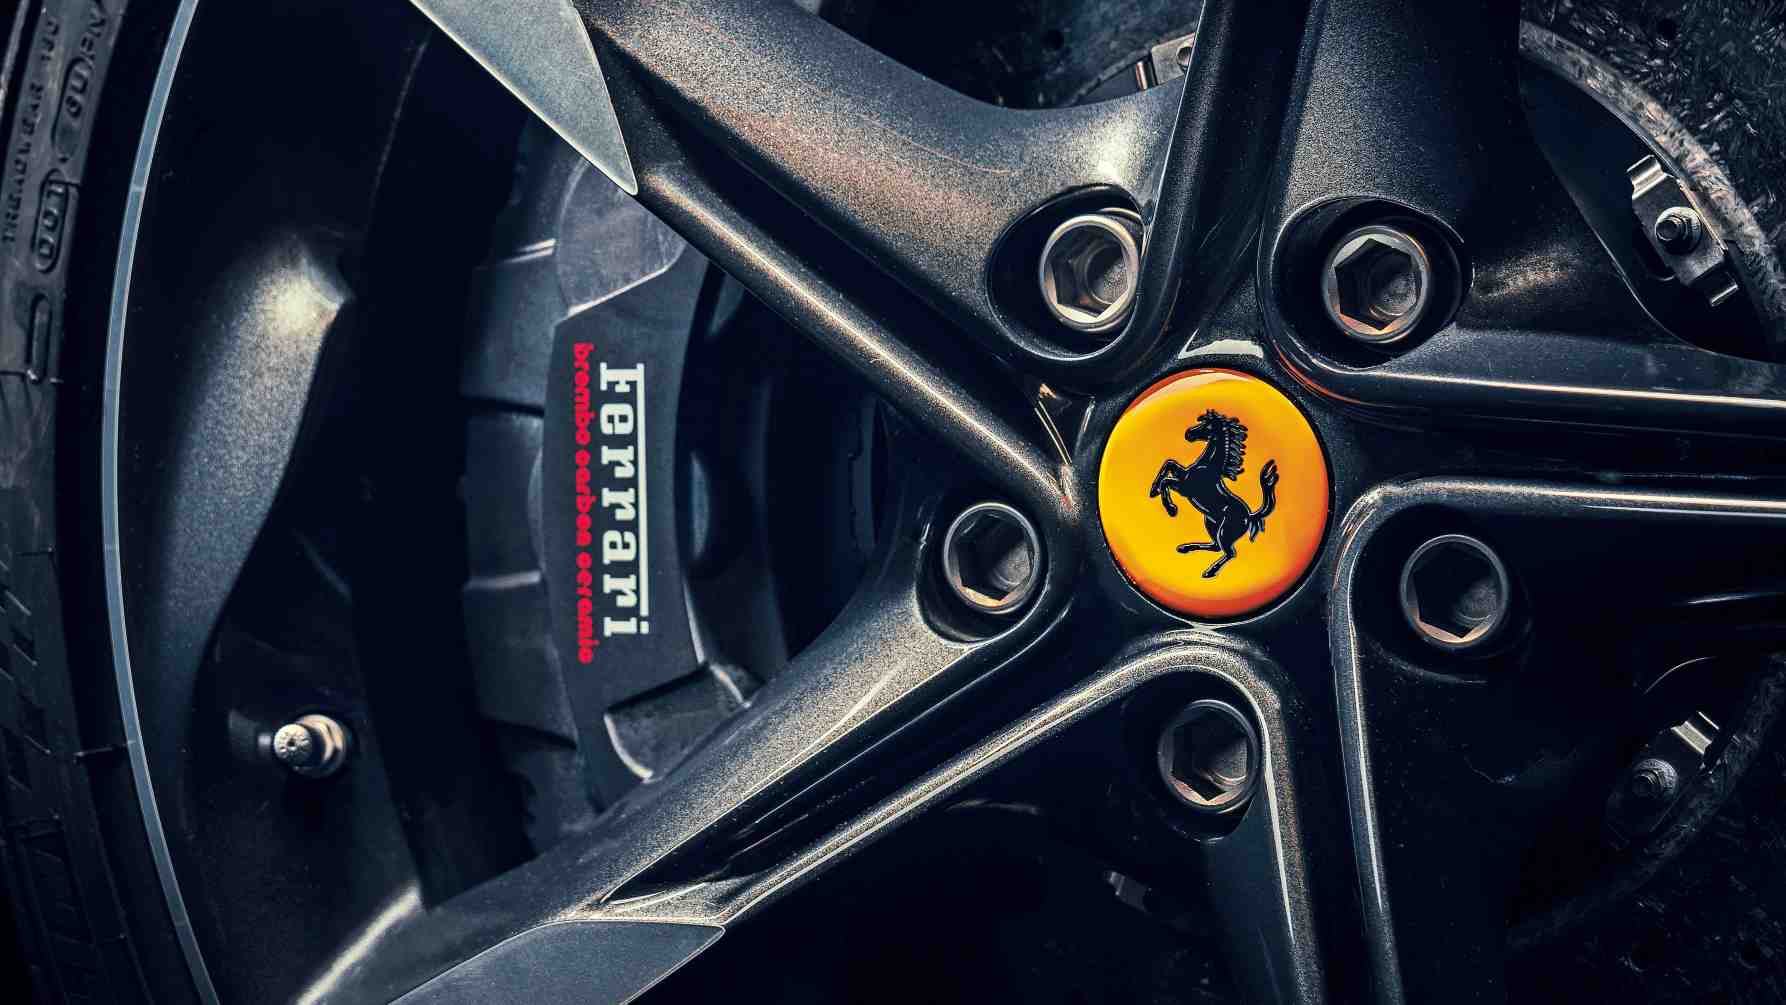 Maranello is said to be working on an electric vehicle that stays true to fans and owners expectations from a Ferrari. Image: Ferrari